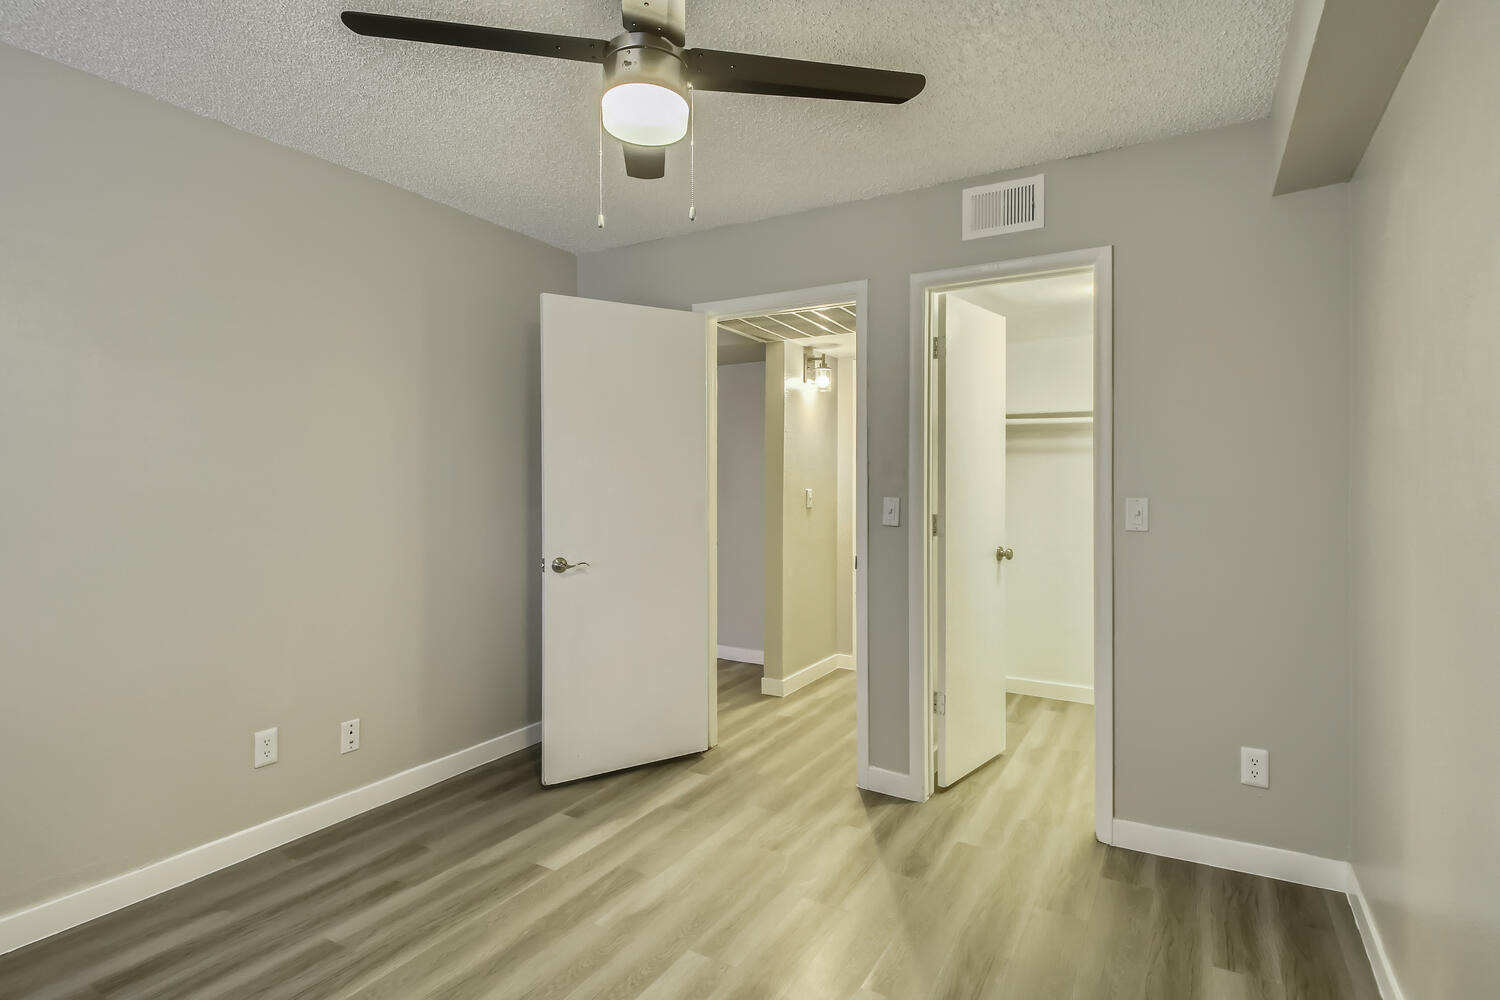 A bedroom with wood-style flooring and a closet at Rise Northridge.